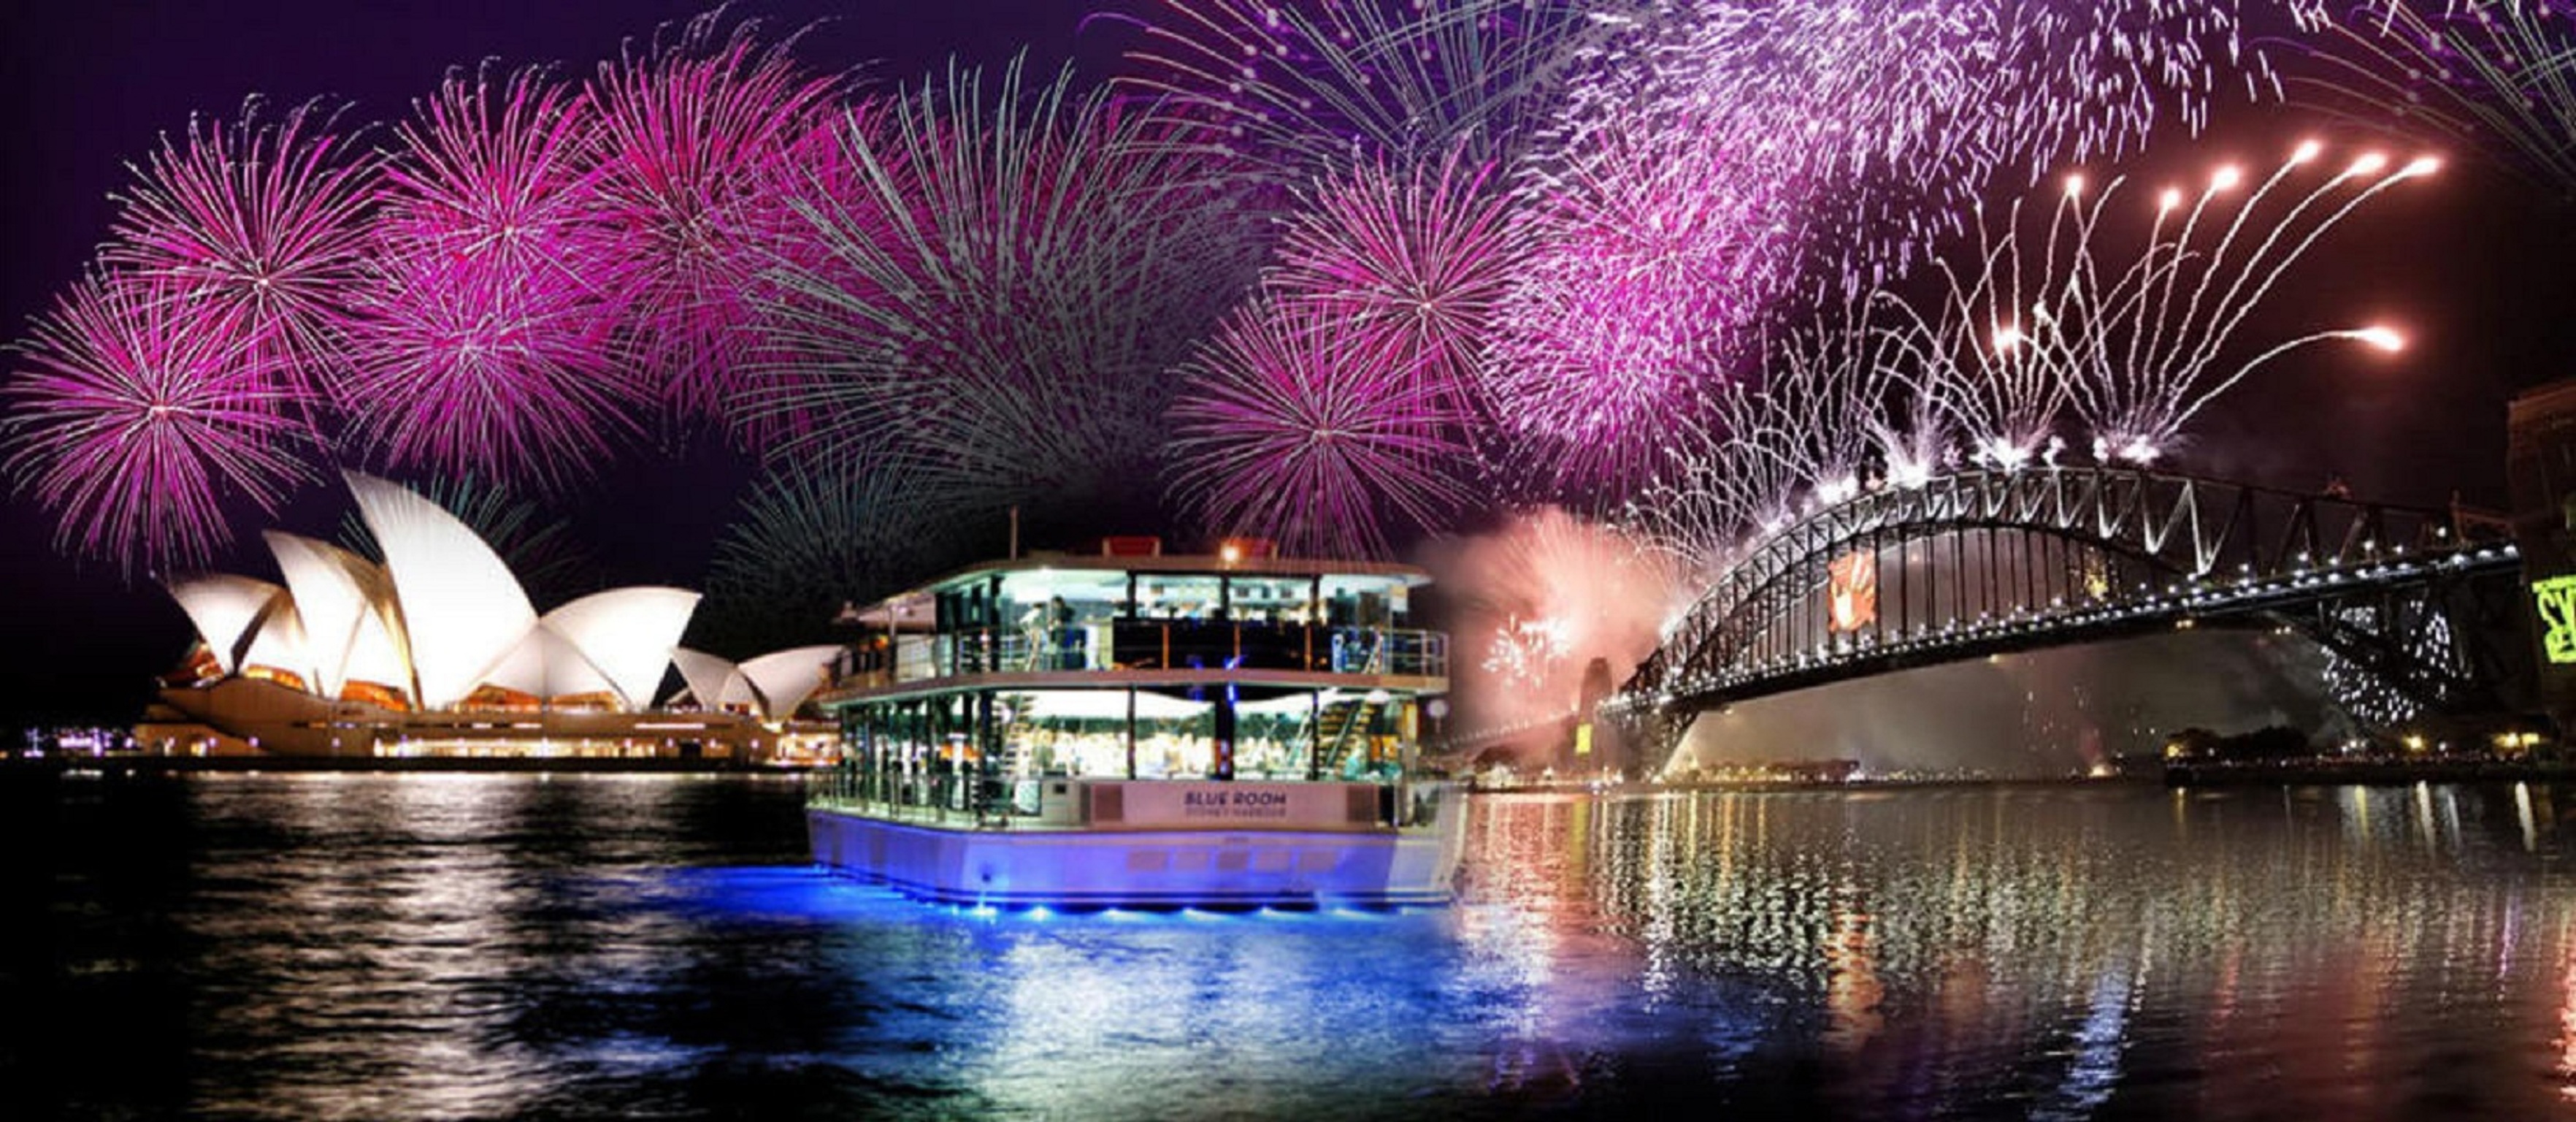 Celebrate New Year’s Eve in Sydney on a Premium Glass Boat, Sydney, New South Wales, Australia